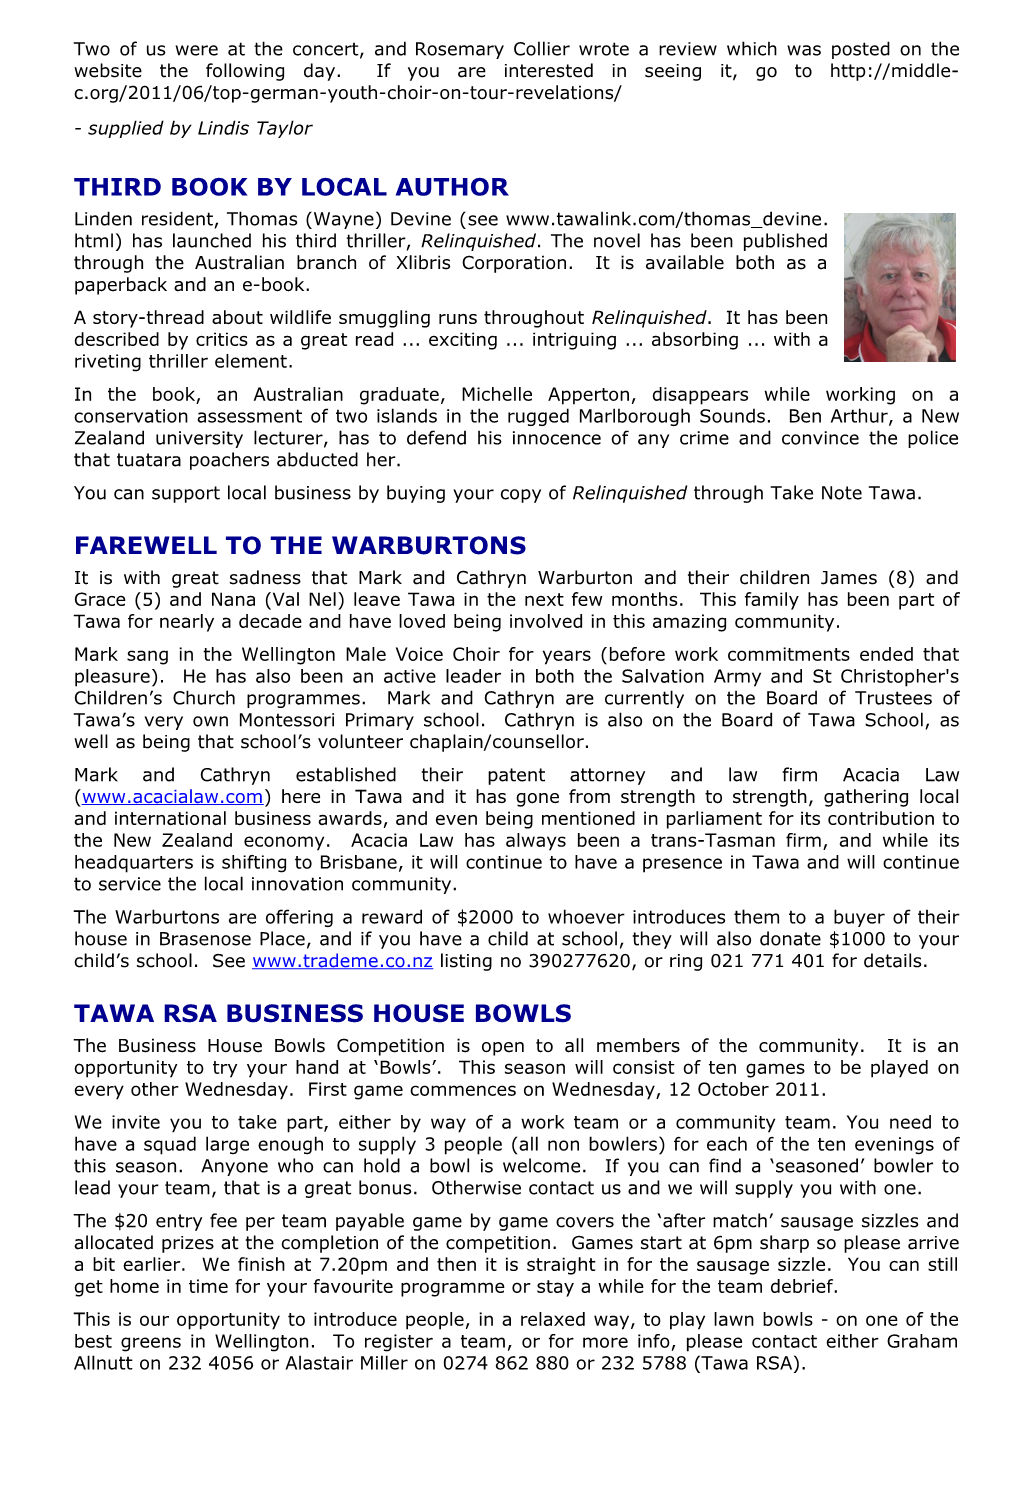 This Community Newsletter Is Sent out on the First and Third Wednesdays of Each Month